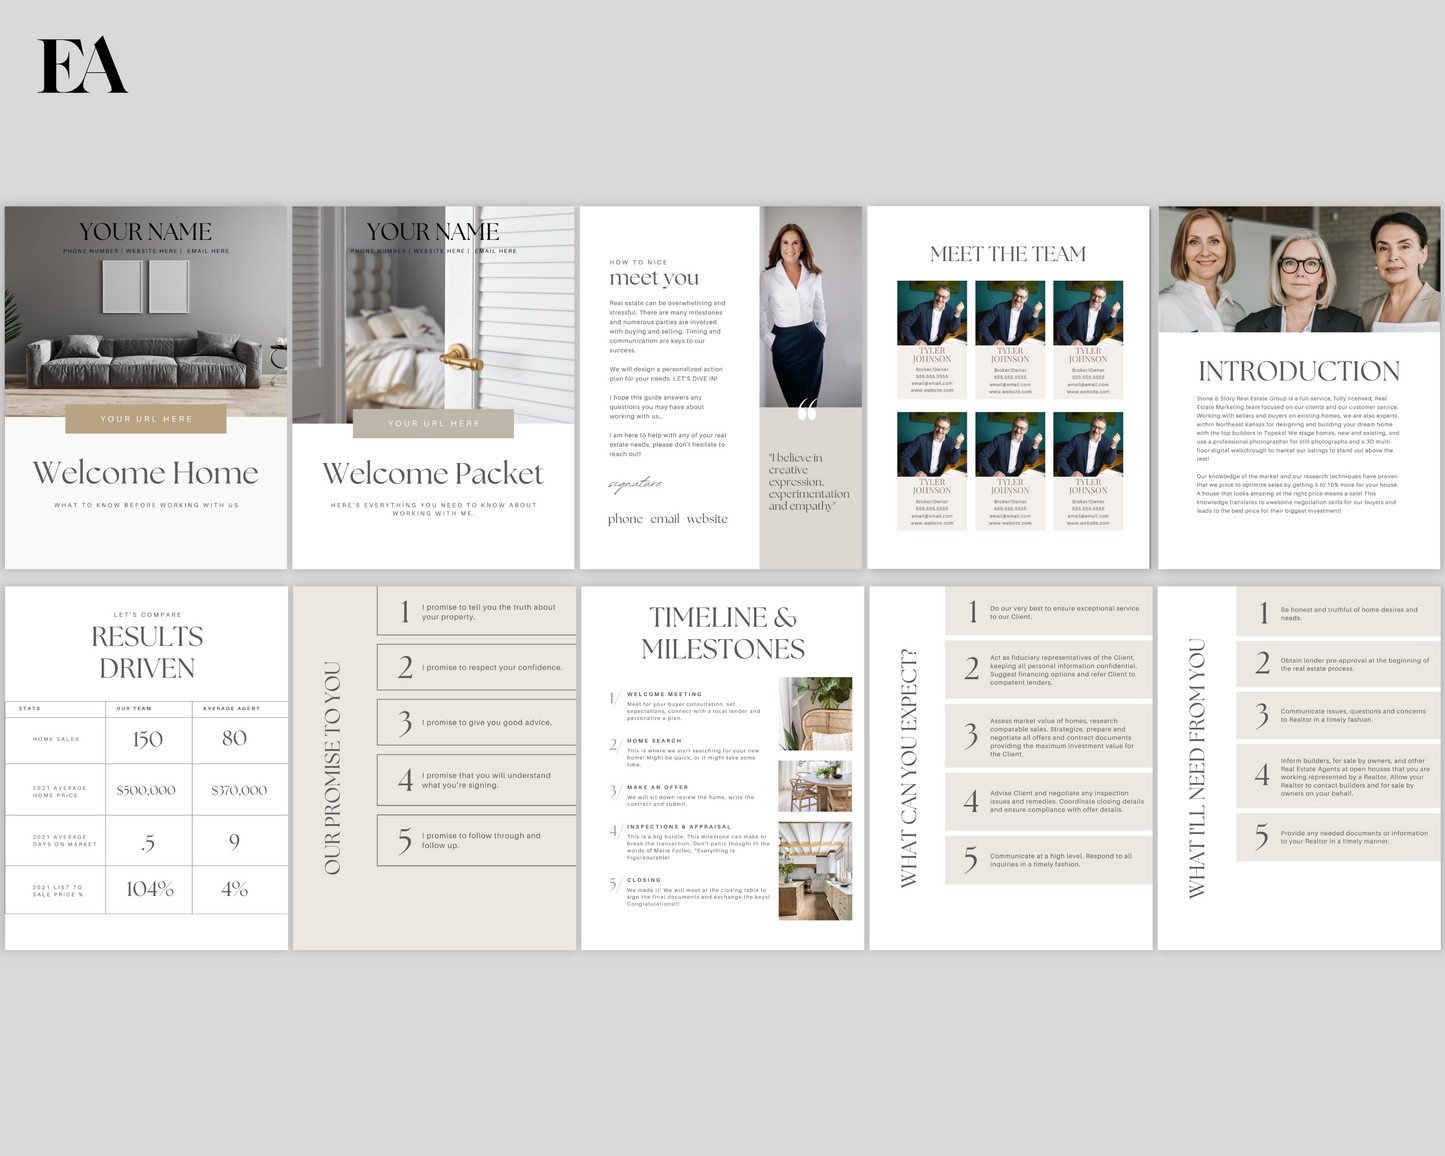 Real Estate Client Welcome Packet, Real Estate Flyer, New Client Packet, Client Onboarding, Realtor Marketing, Canva Template, Buyer Guide